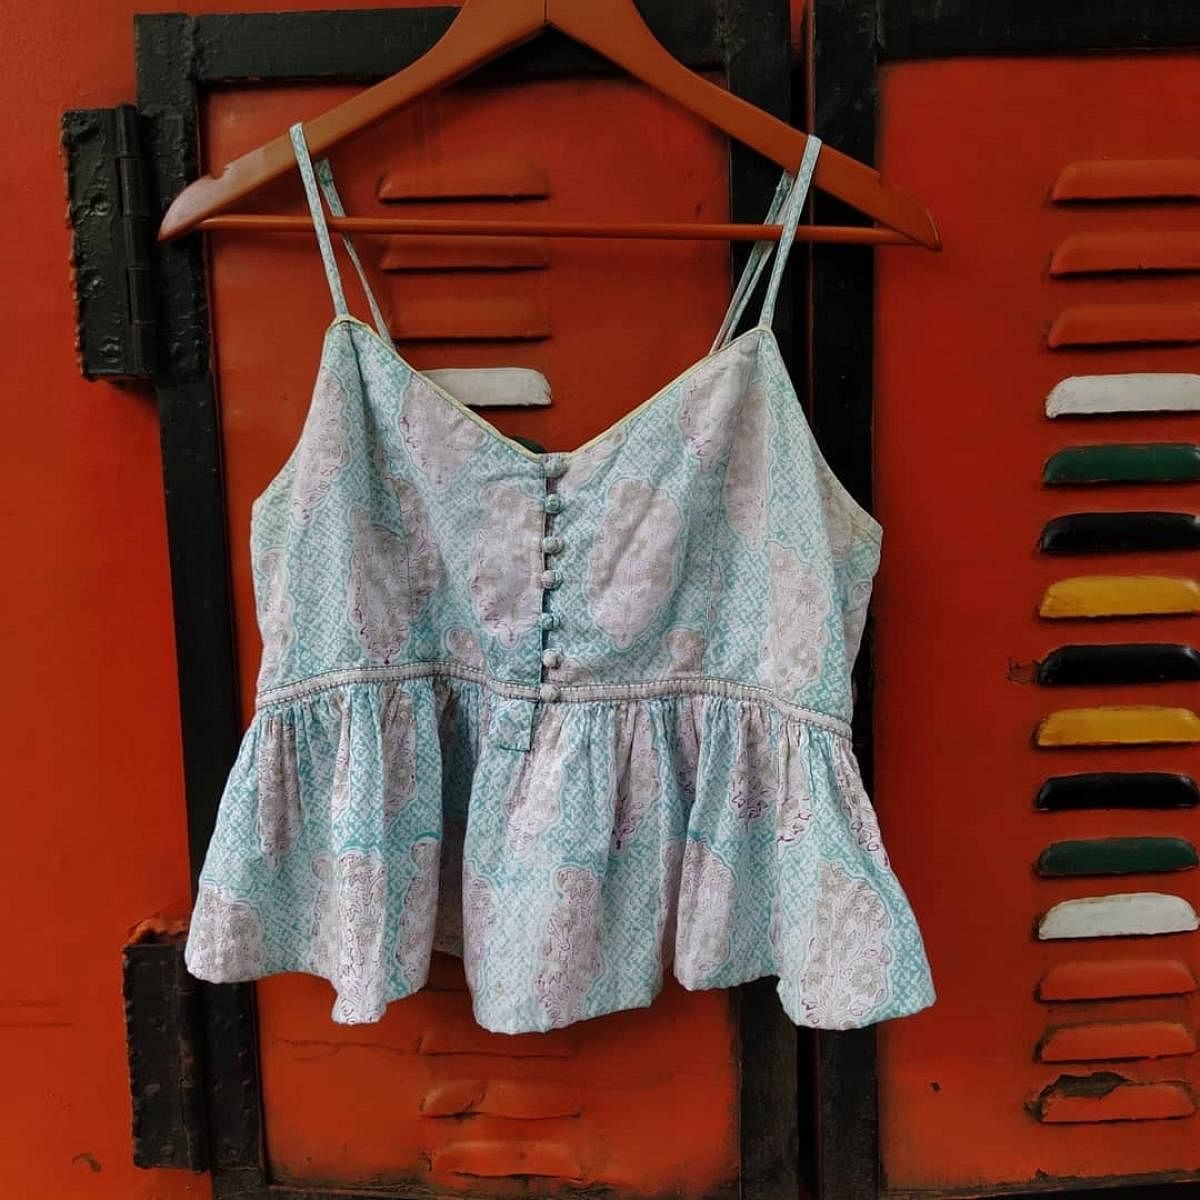 Disha Pai upcycles old and out-of-use clothes.